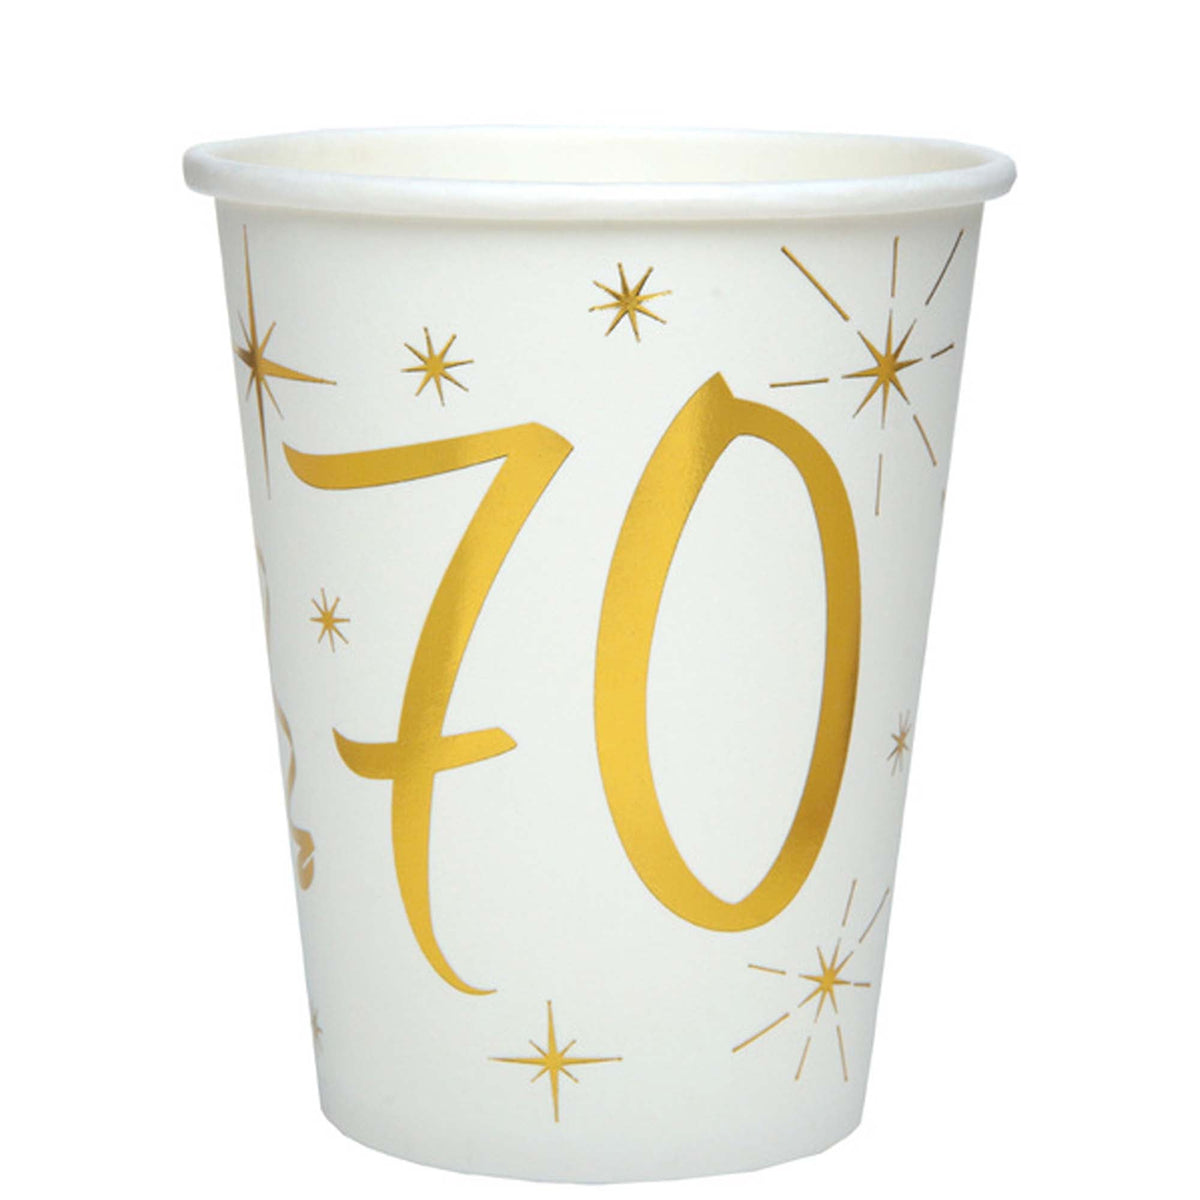 SANTEX General Birthday Starry Golden Age 70th Birthday Party Paper Cups, 9 Oz, 10 Count 3660380040514